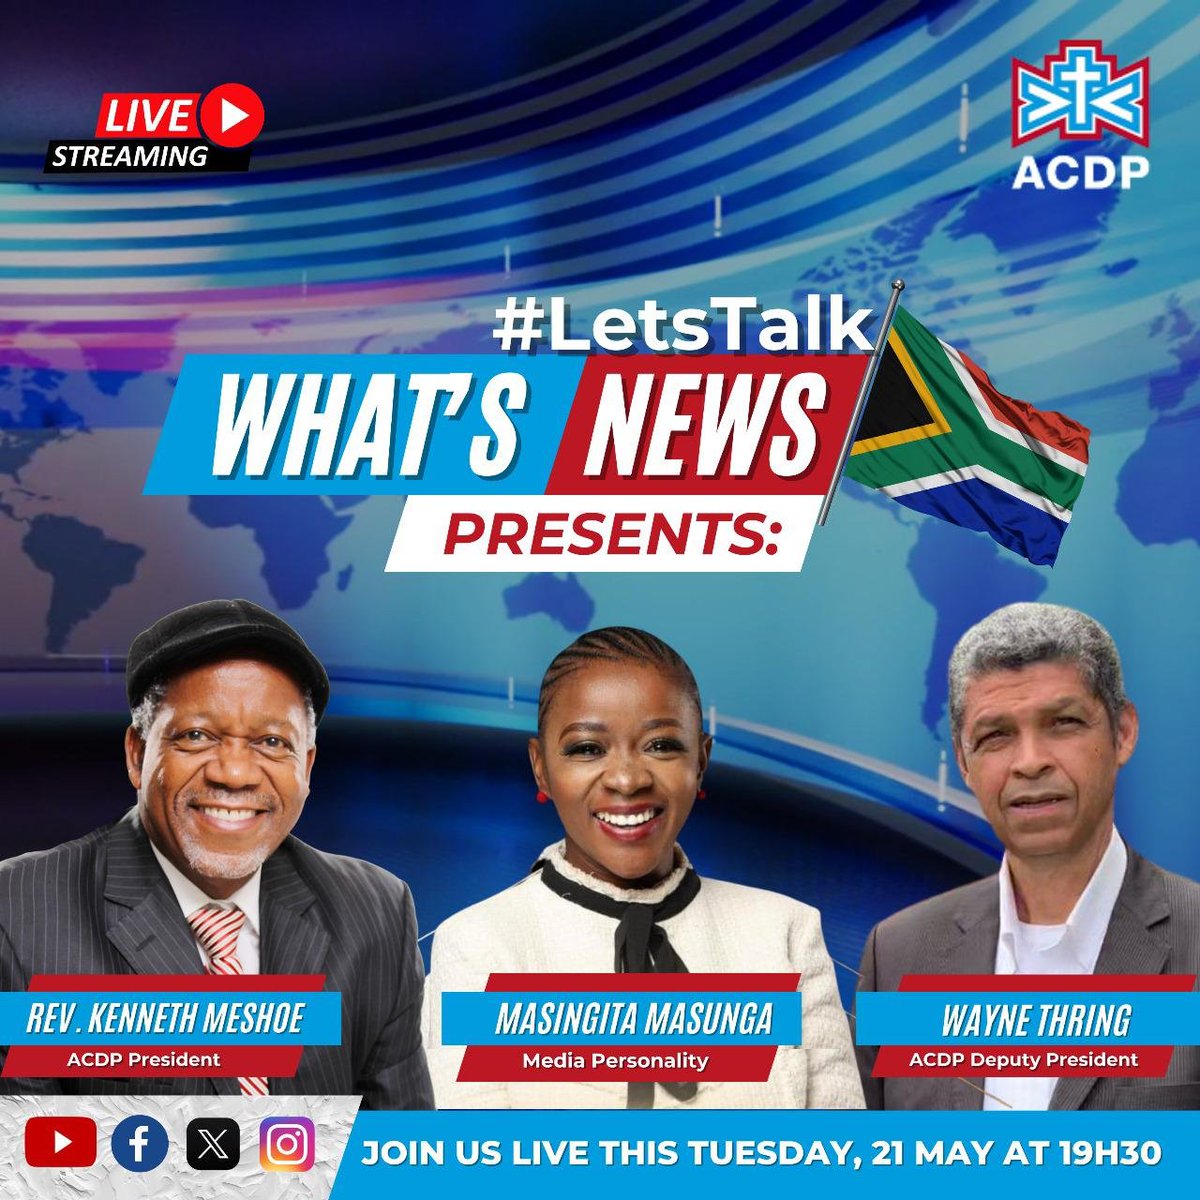 𝗡𝗢𝗧 𝘁𝗼 𝗯𝗲 𝗠𝗜𝗦𝗦𝗘𝗗!!! Tonight we have another great livestream in store for everyone. Among our featured guests will be Masingitha Masunga, an award-winning media personality and ambitious entrepreneur who was born a miracle child and who refused to allow her